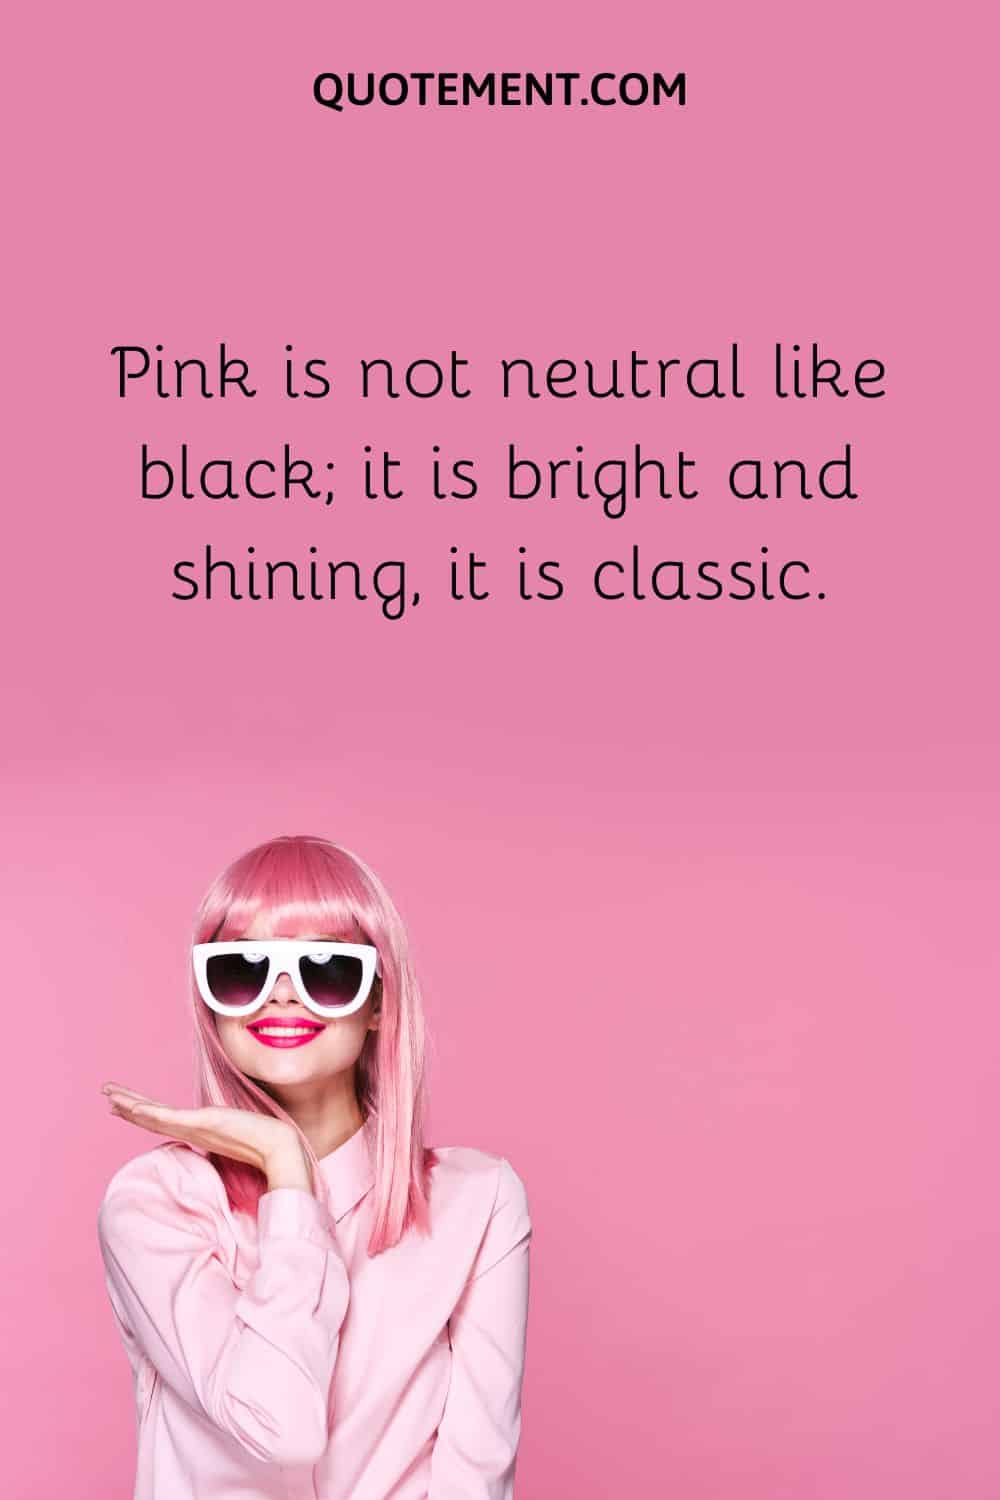 Pink is not neutral like black; it is bright and shining, it is classic.